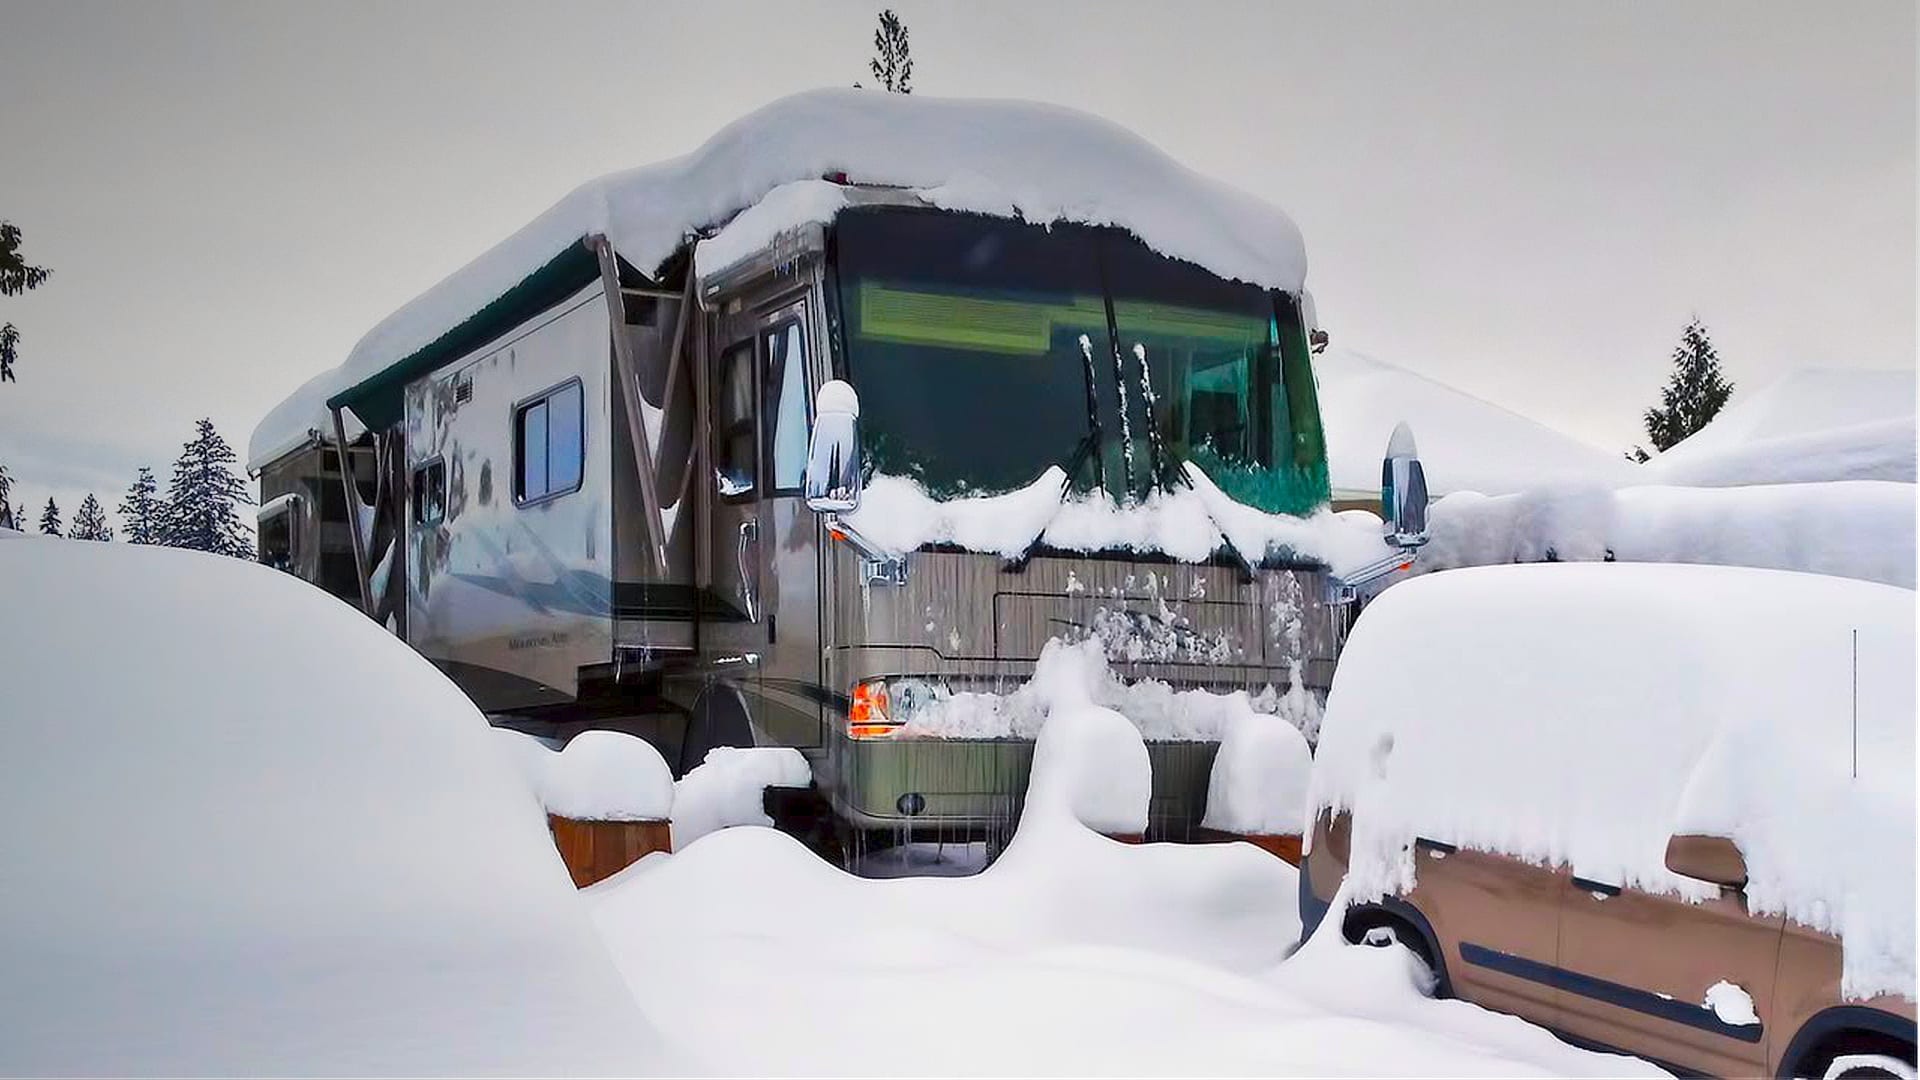 Our RV parked in the winter snow.